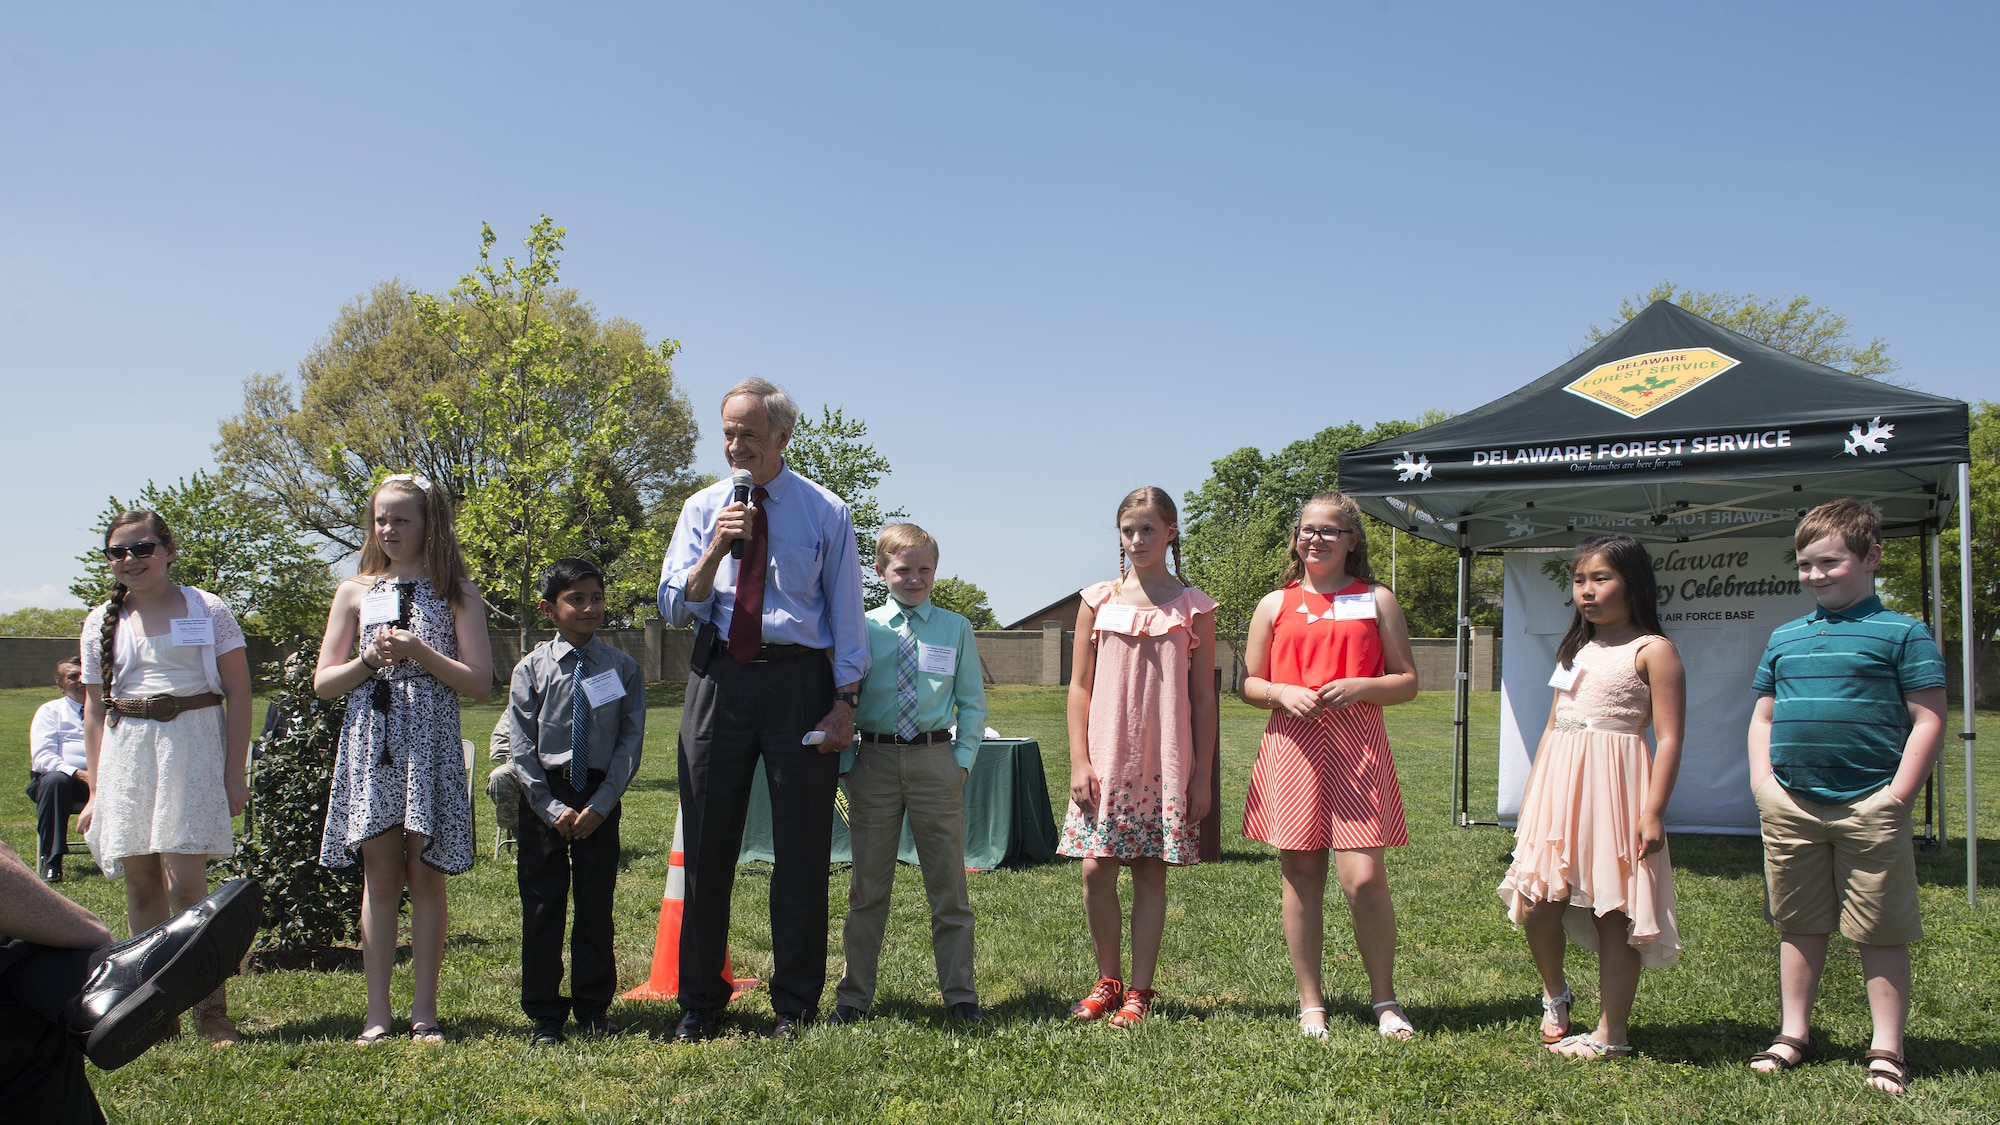 Sen. Tom Carper, Del., speaks at the State of Delaware Arbor Day event April 28, 2017, at Dover Air Force Base, Del. The event recognized Dover AFB as a Tree City USA for 25-straight years. (U.S. Air Force photo by Senior Airman Zachary Cacicia)